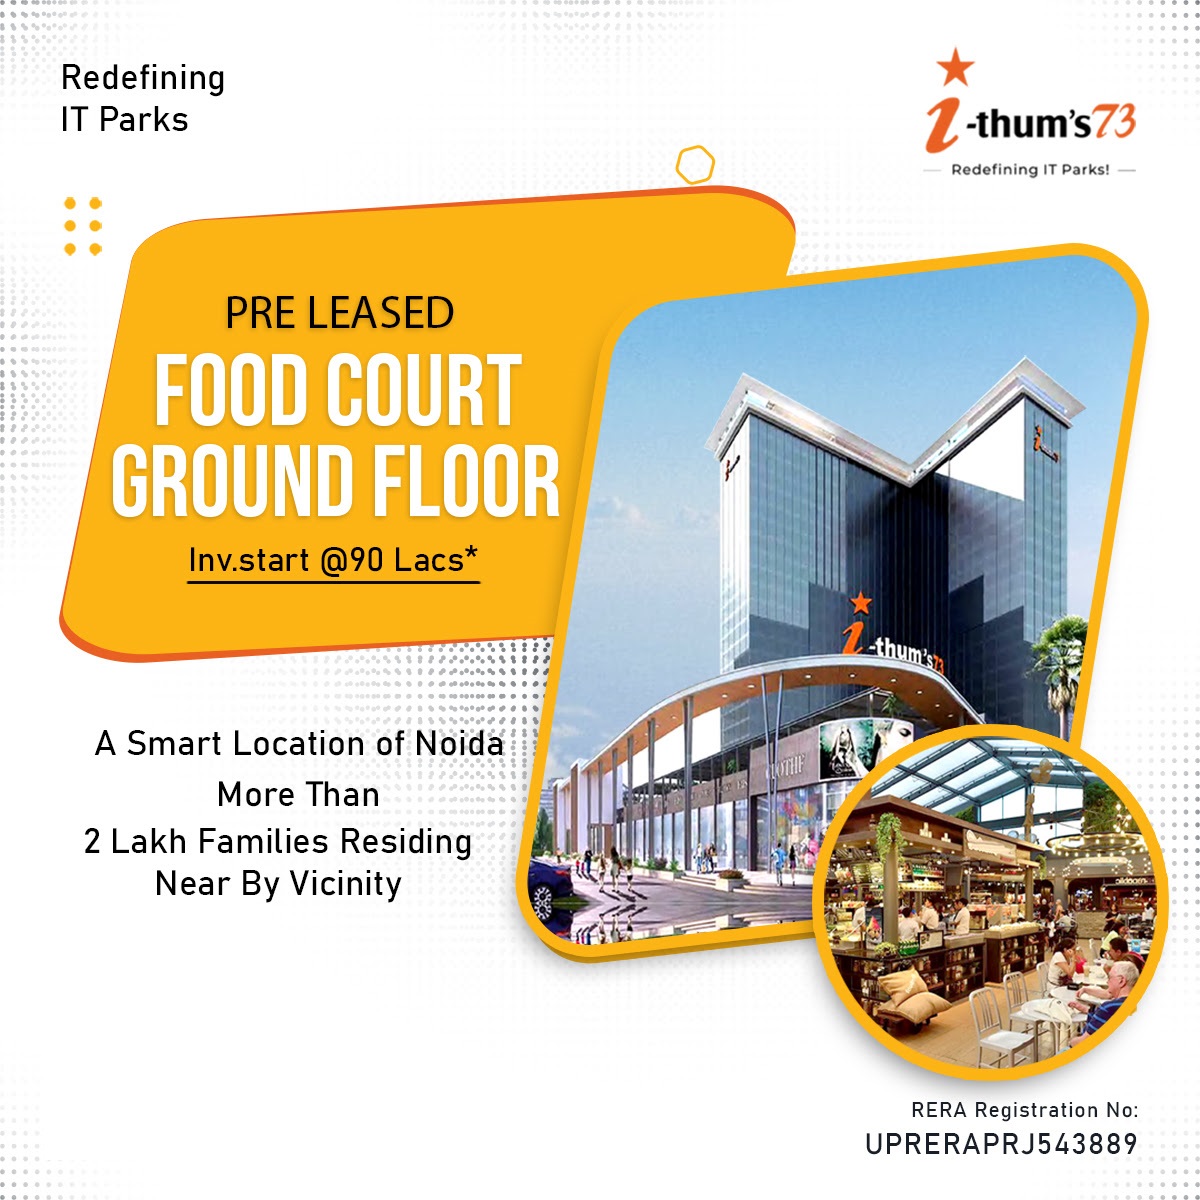 Pre leased food court ground floor Inv.start Rs 90 Lacs at Grandslam The I Thum, Noida